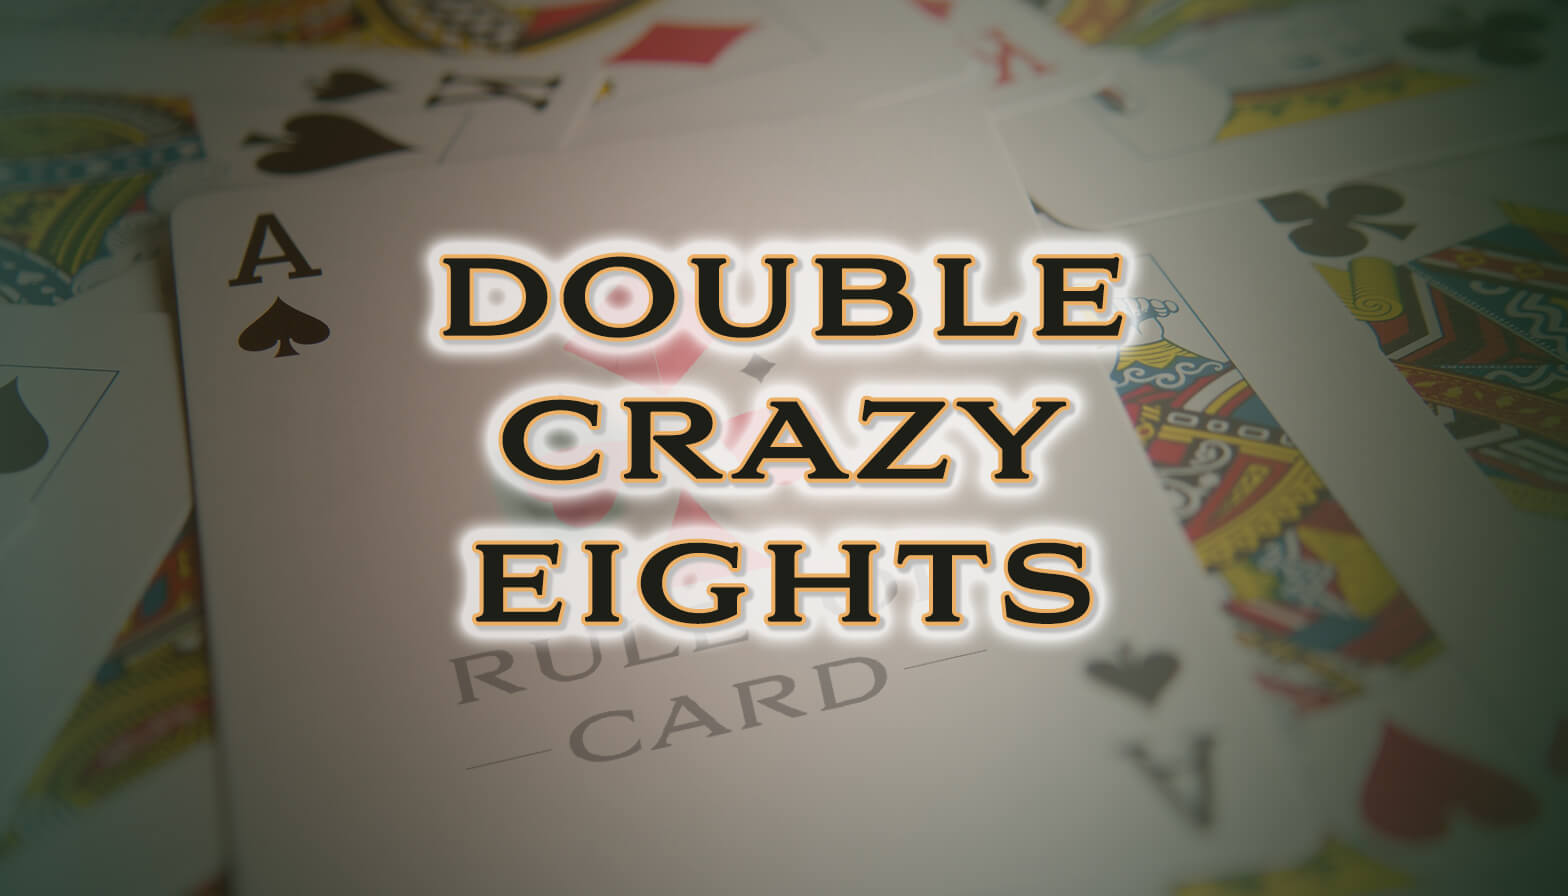 Playing the card game Double Crazy Eights